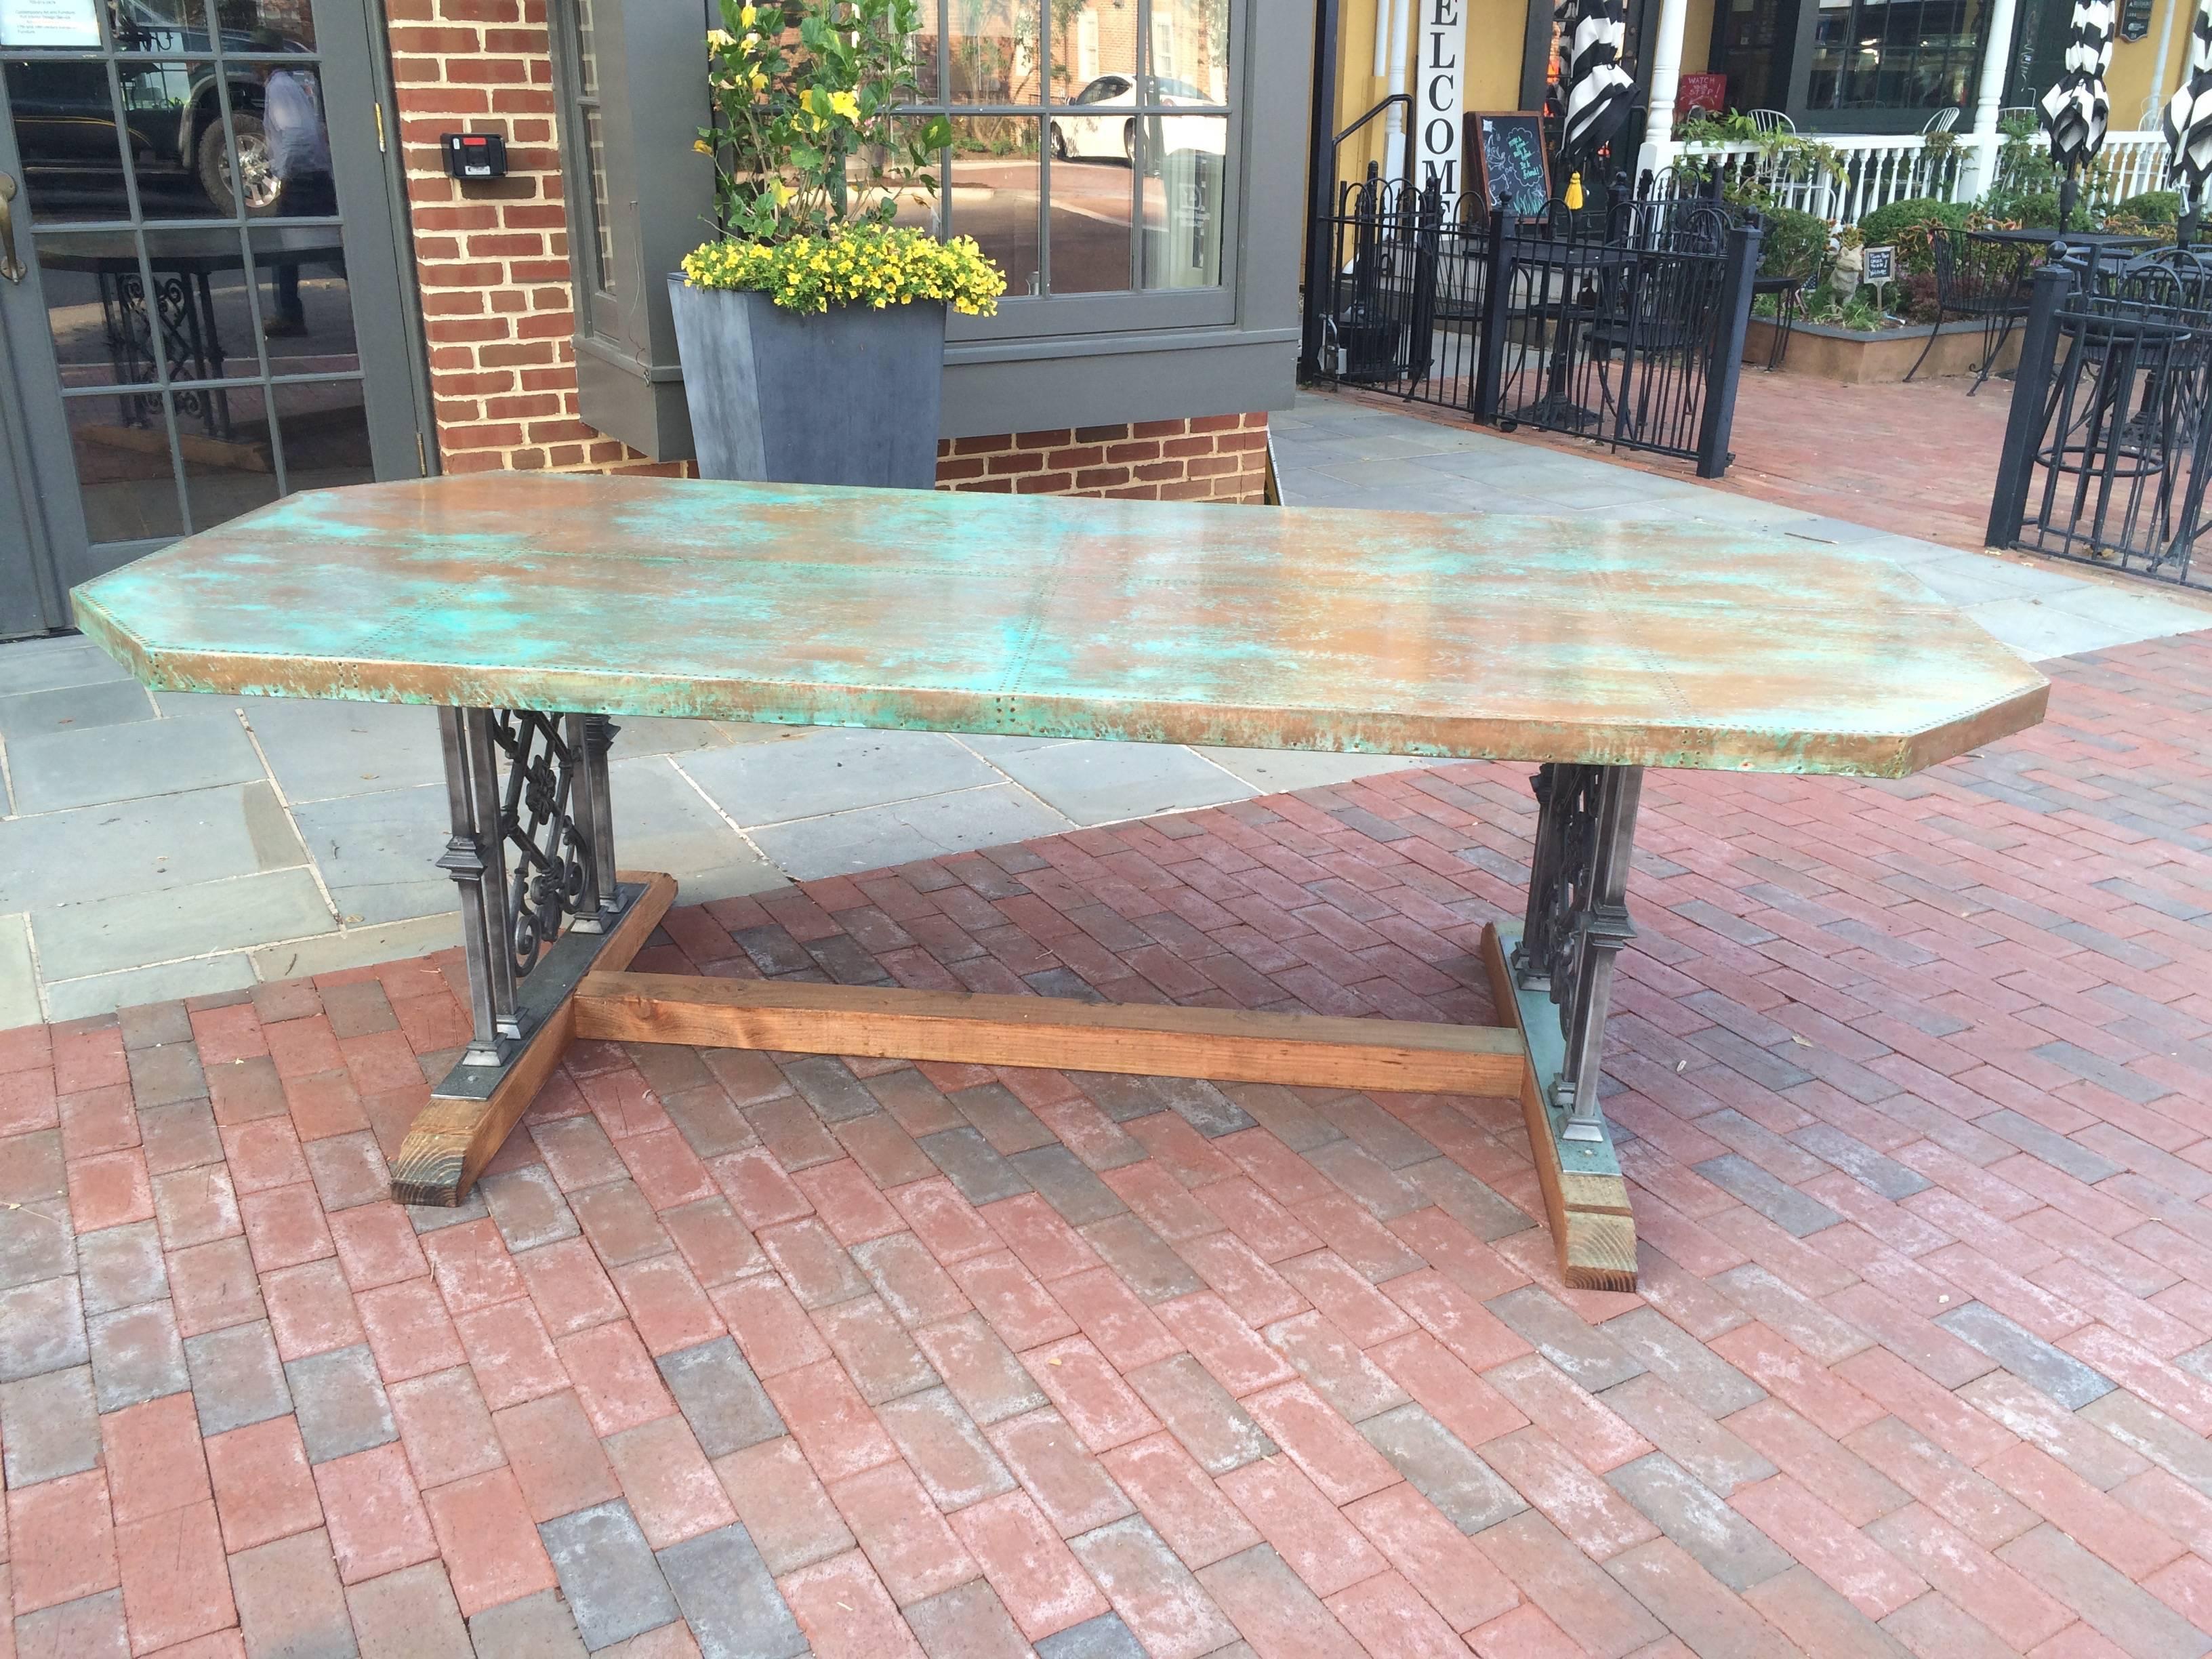 Custom designed copper dining table. Top paneled in copper with a green “verdigris“ patination and 2000 hand-hammered nails. Trestle Base made of cast iron balustrade with cedar feet and central stretcher .This table is designed and custom made by